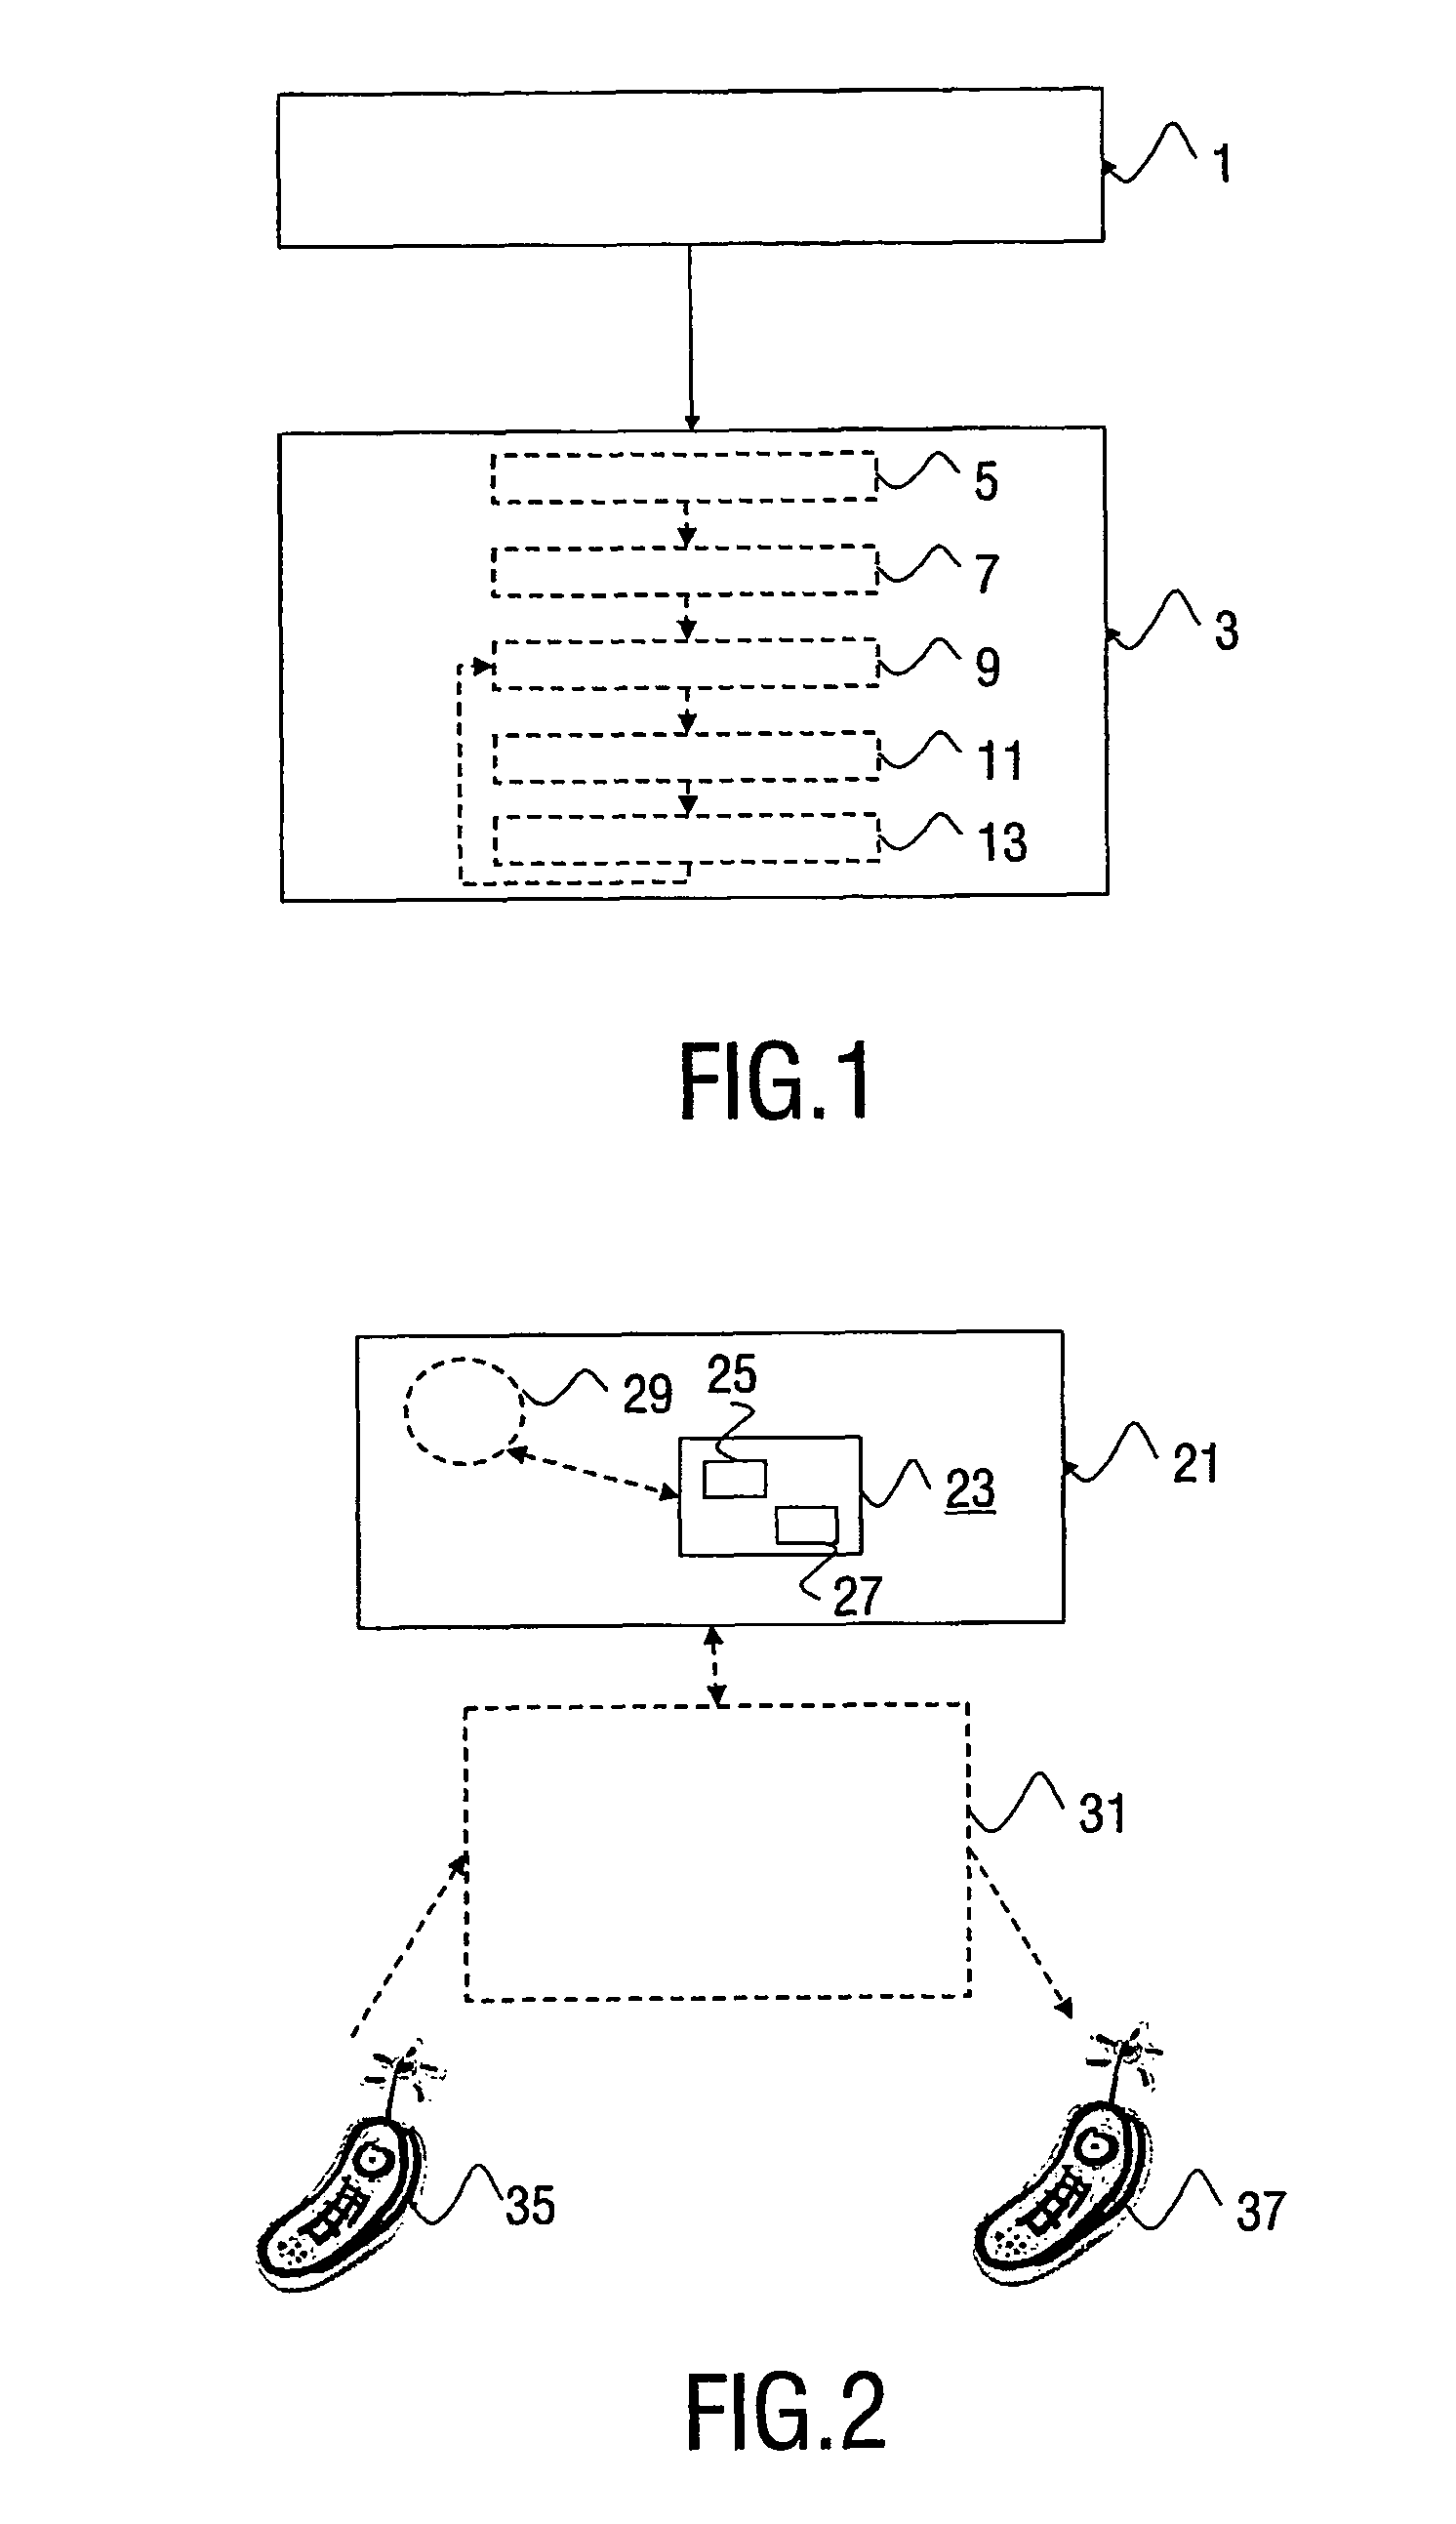 Method and electronic device for reducing size of an electronic collection of media elements